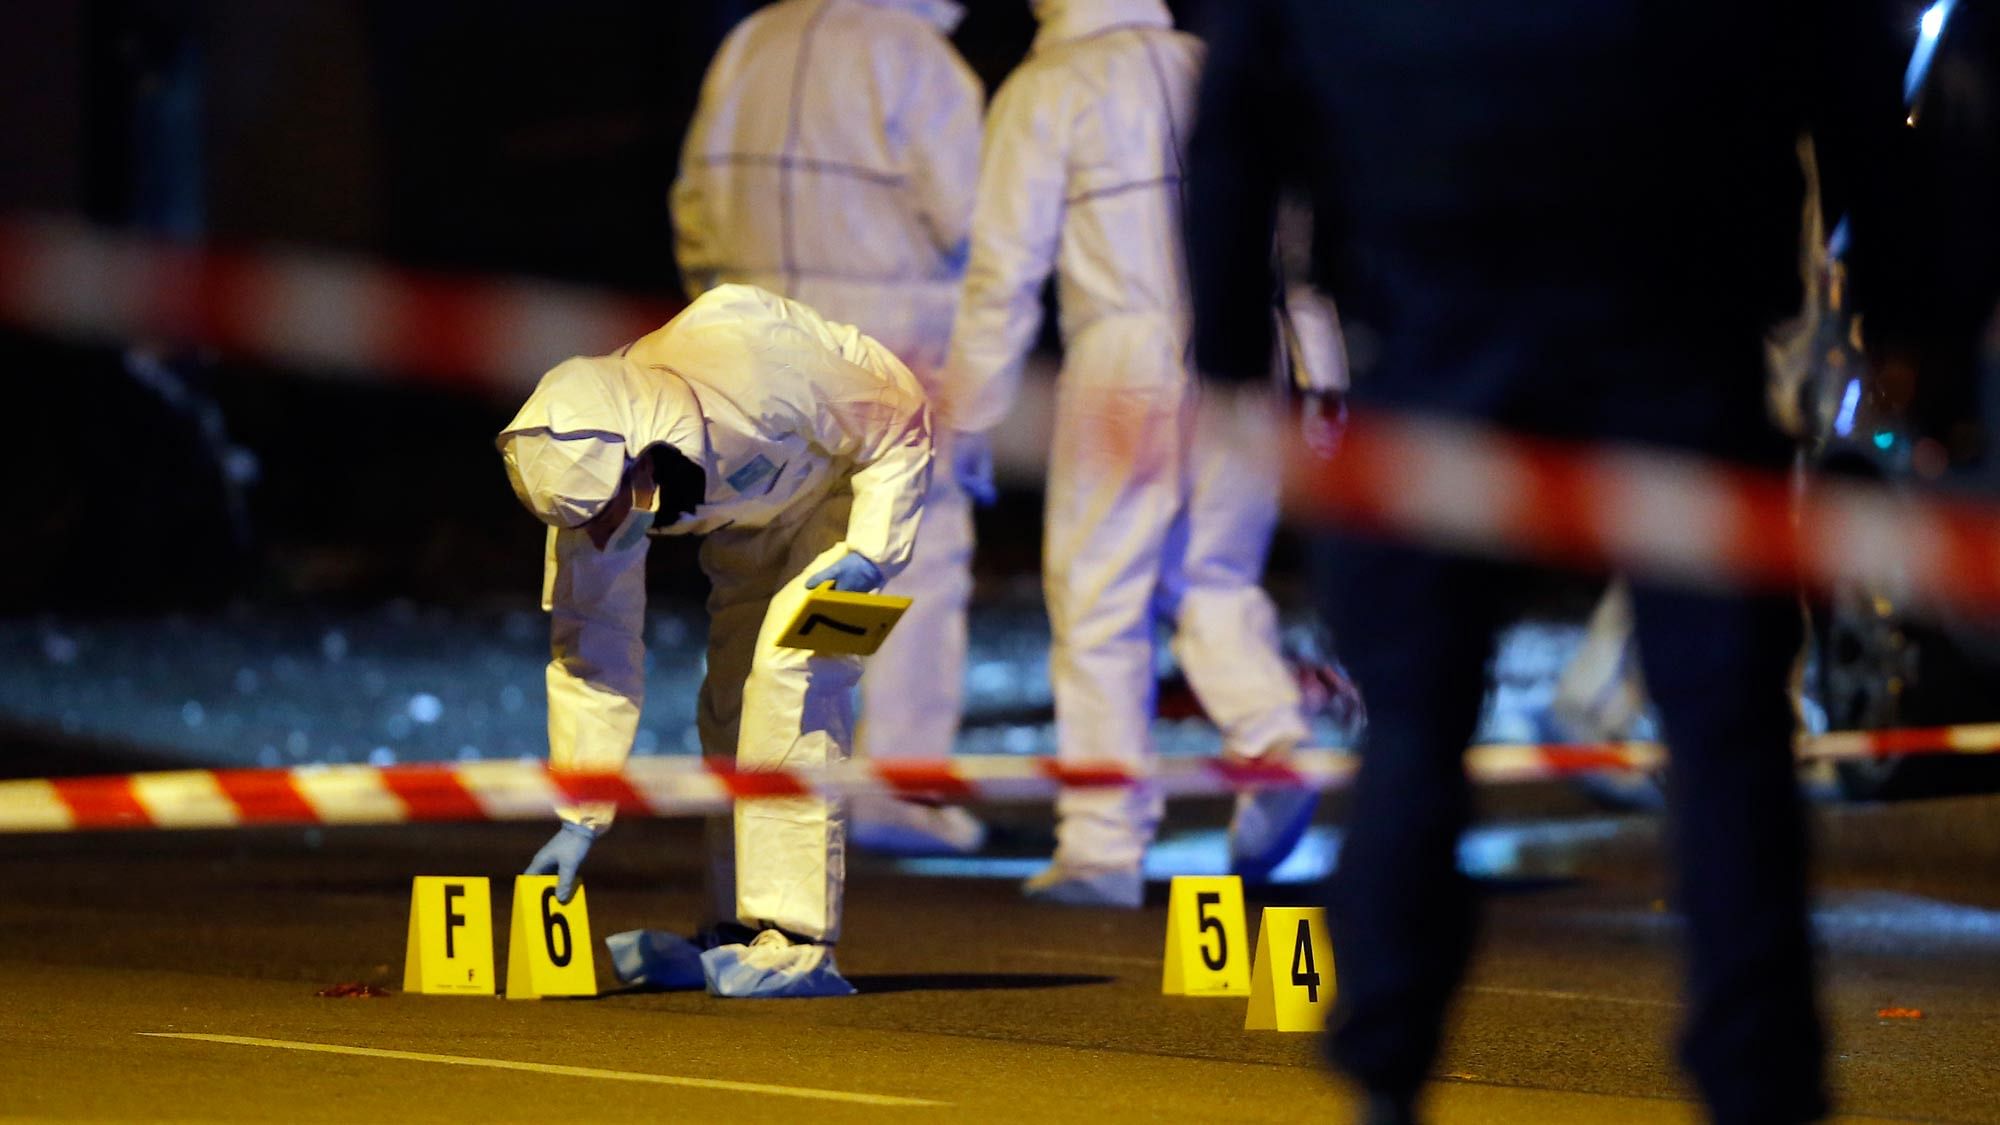 Investigating police officers work outside the Stade de France stadium. (Photo: AP)